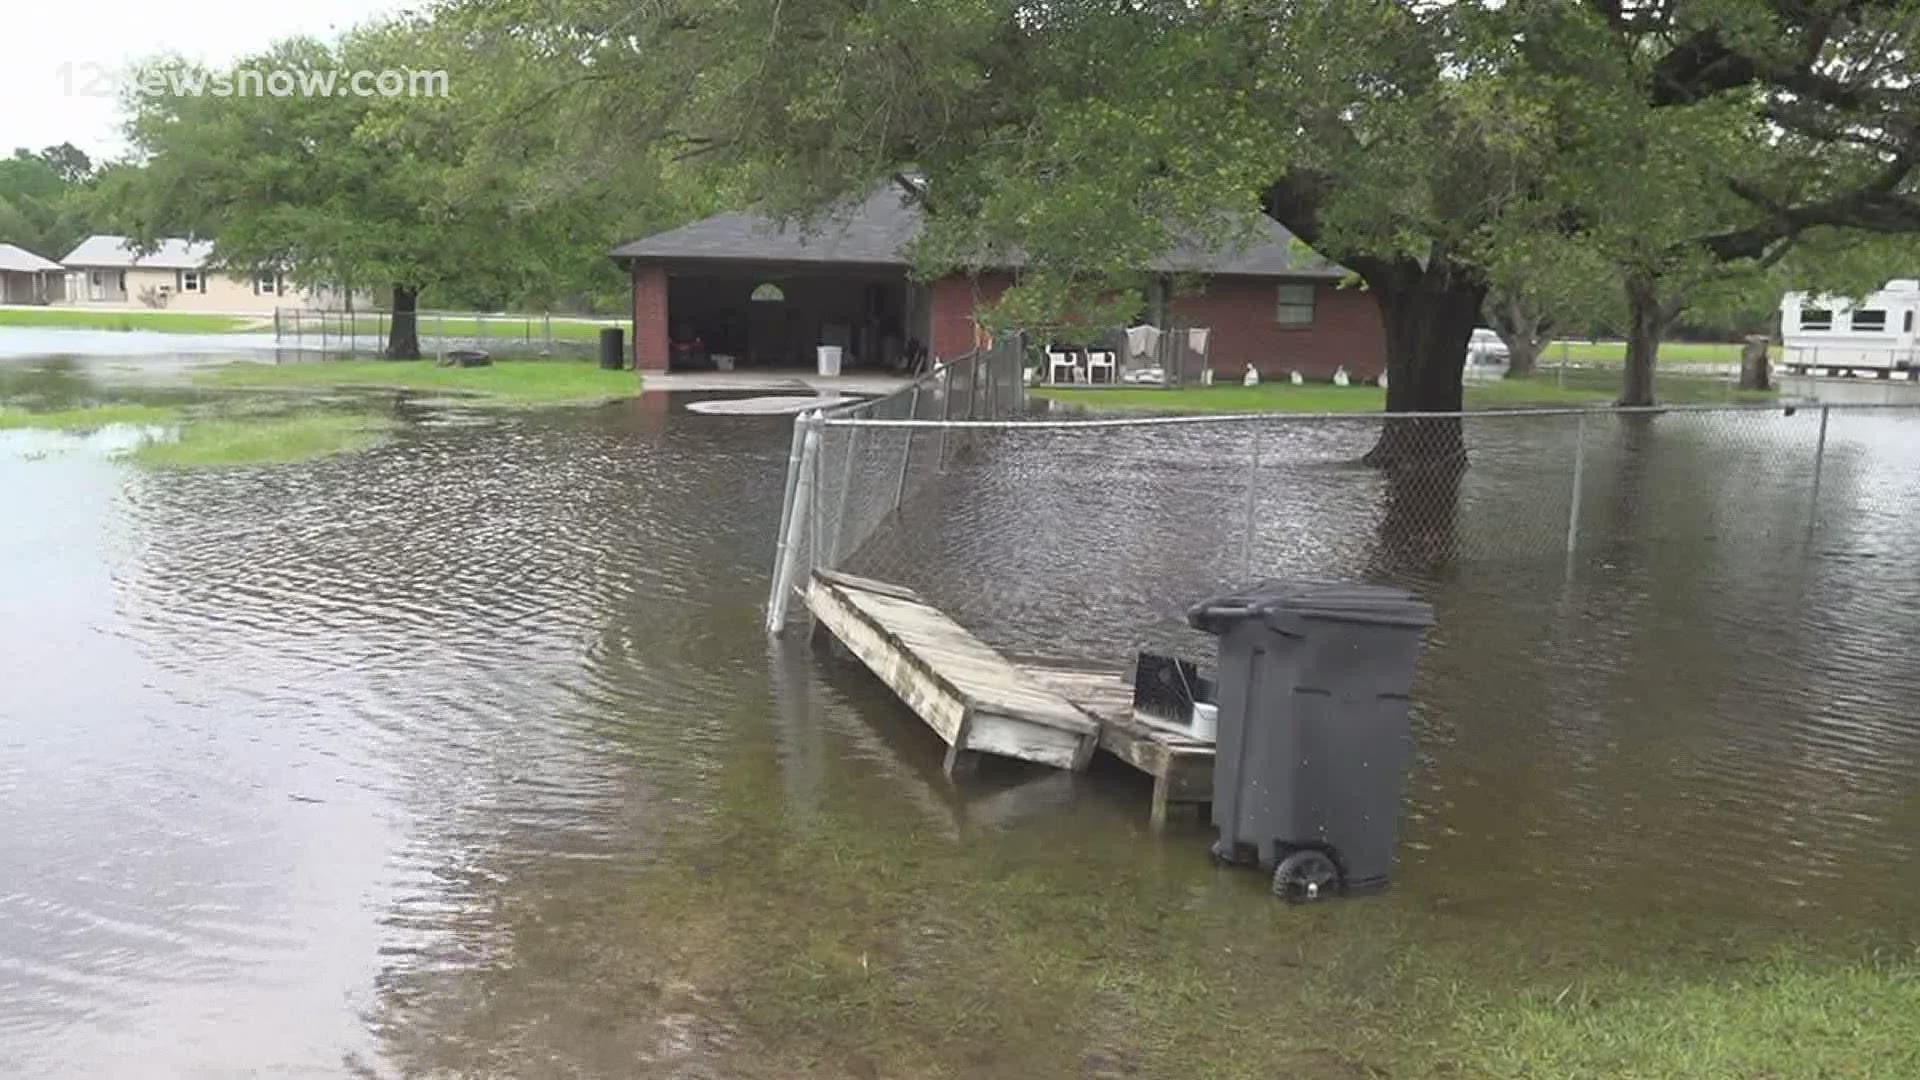 Some of the residents in the area say Monday's rainfall counted as the third flood in the neighborhood since 2017.